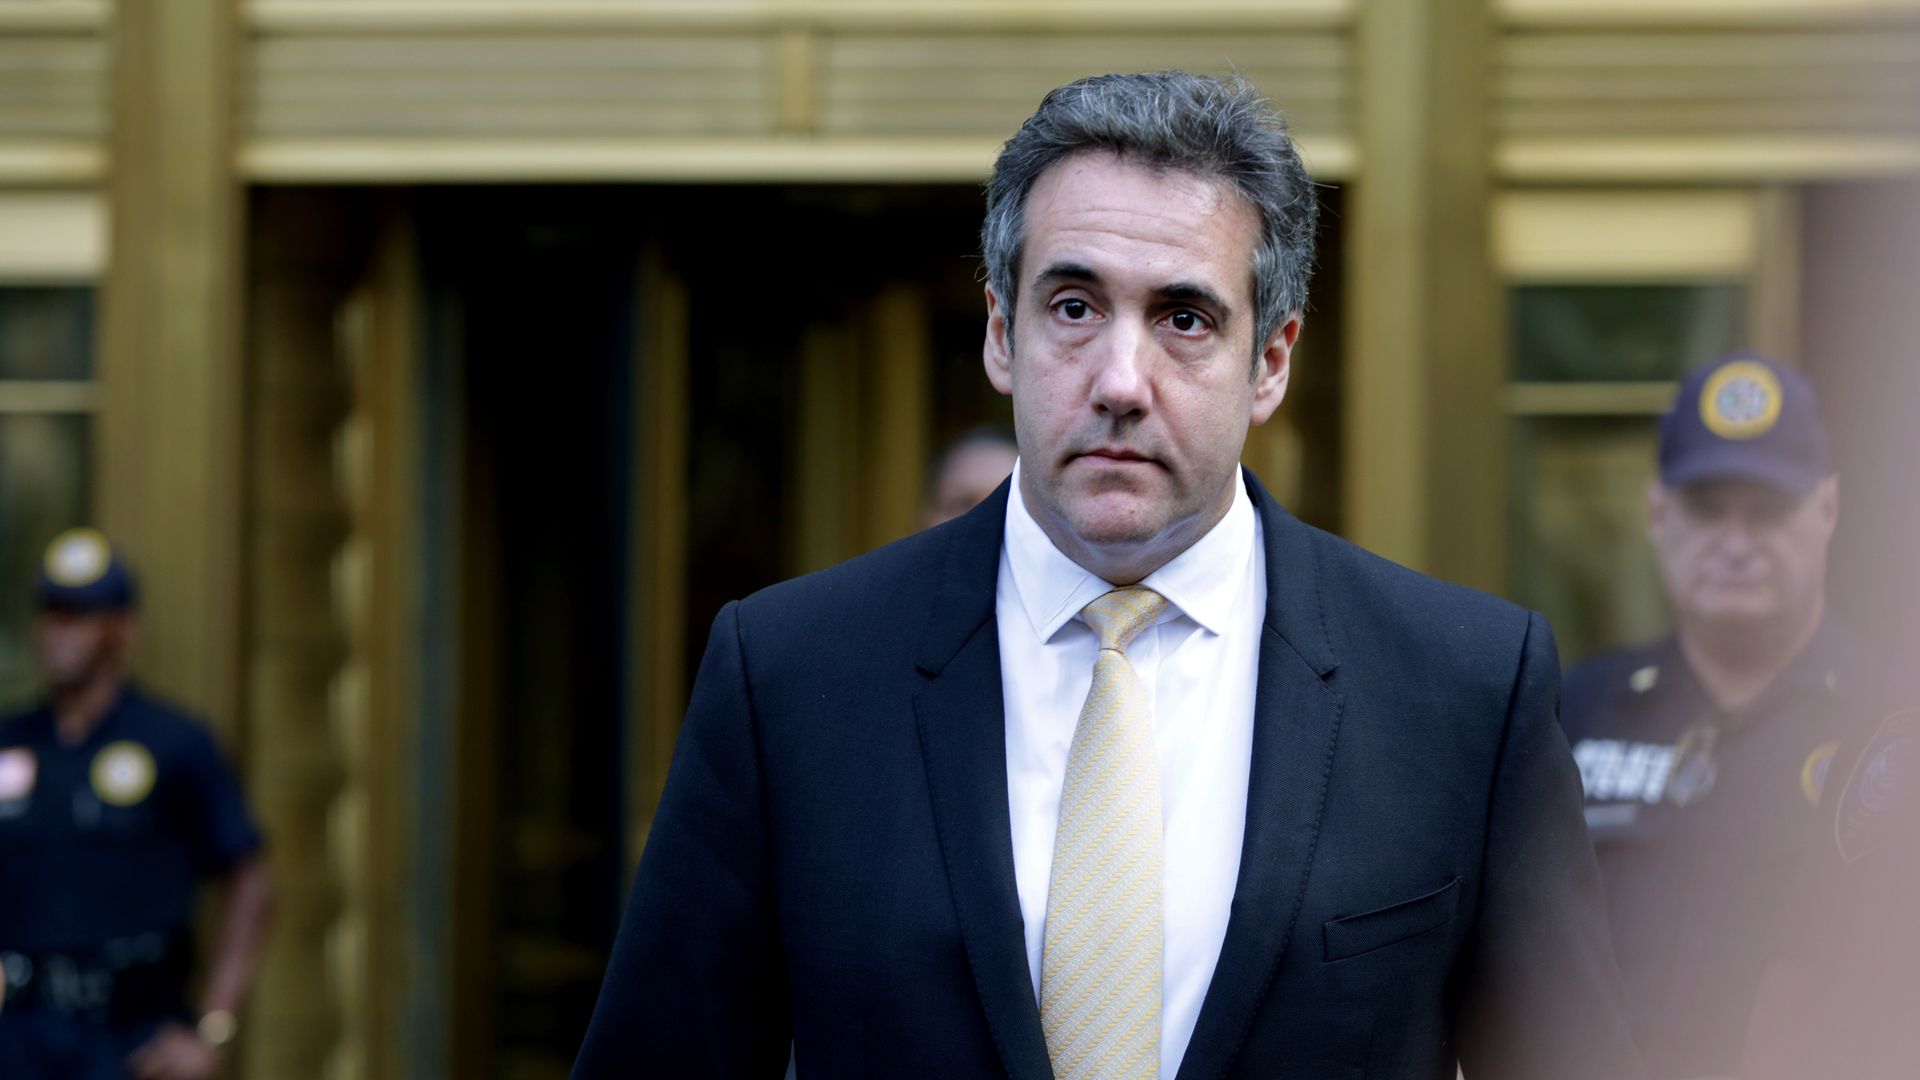 Michael Cohen, former lawyer to President Trump, exits the Federal Courthouse on Tuesday. Photo: Yana Paskova/Getty Images